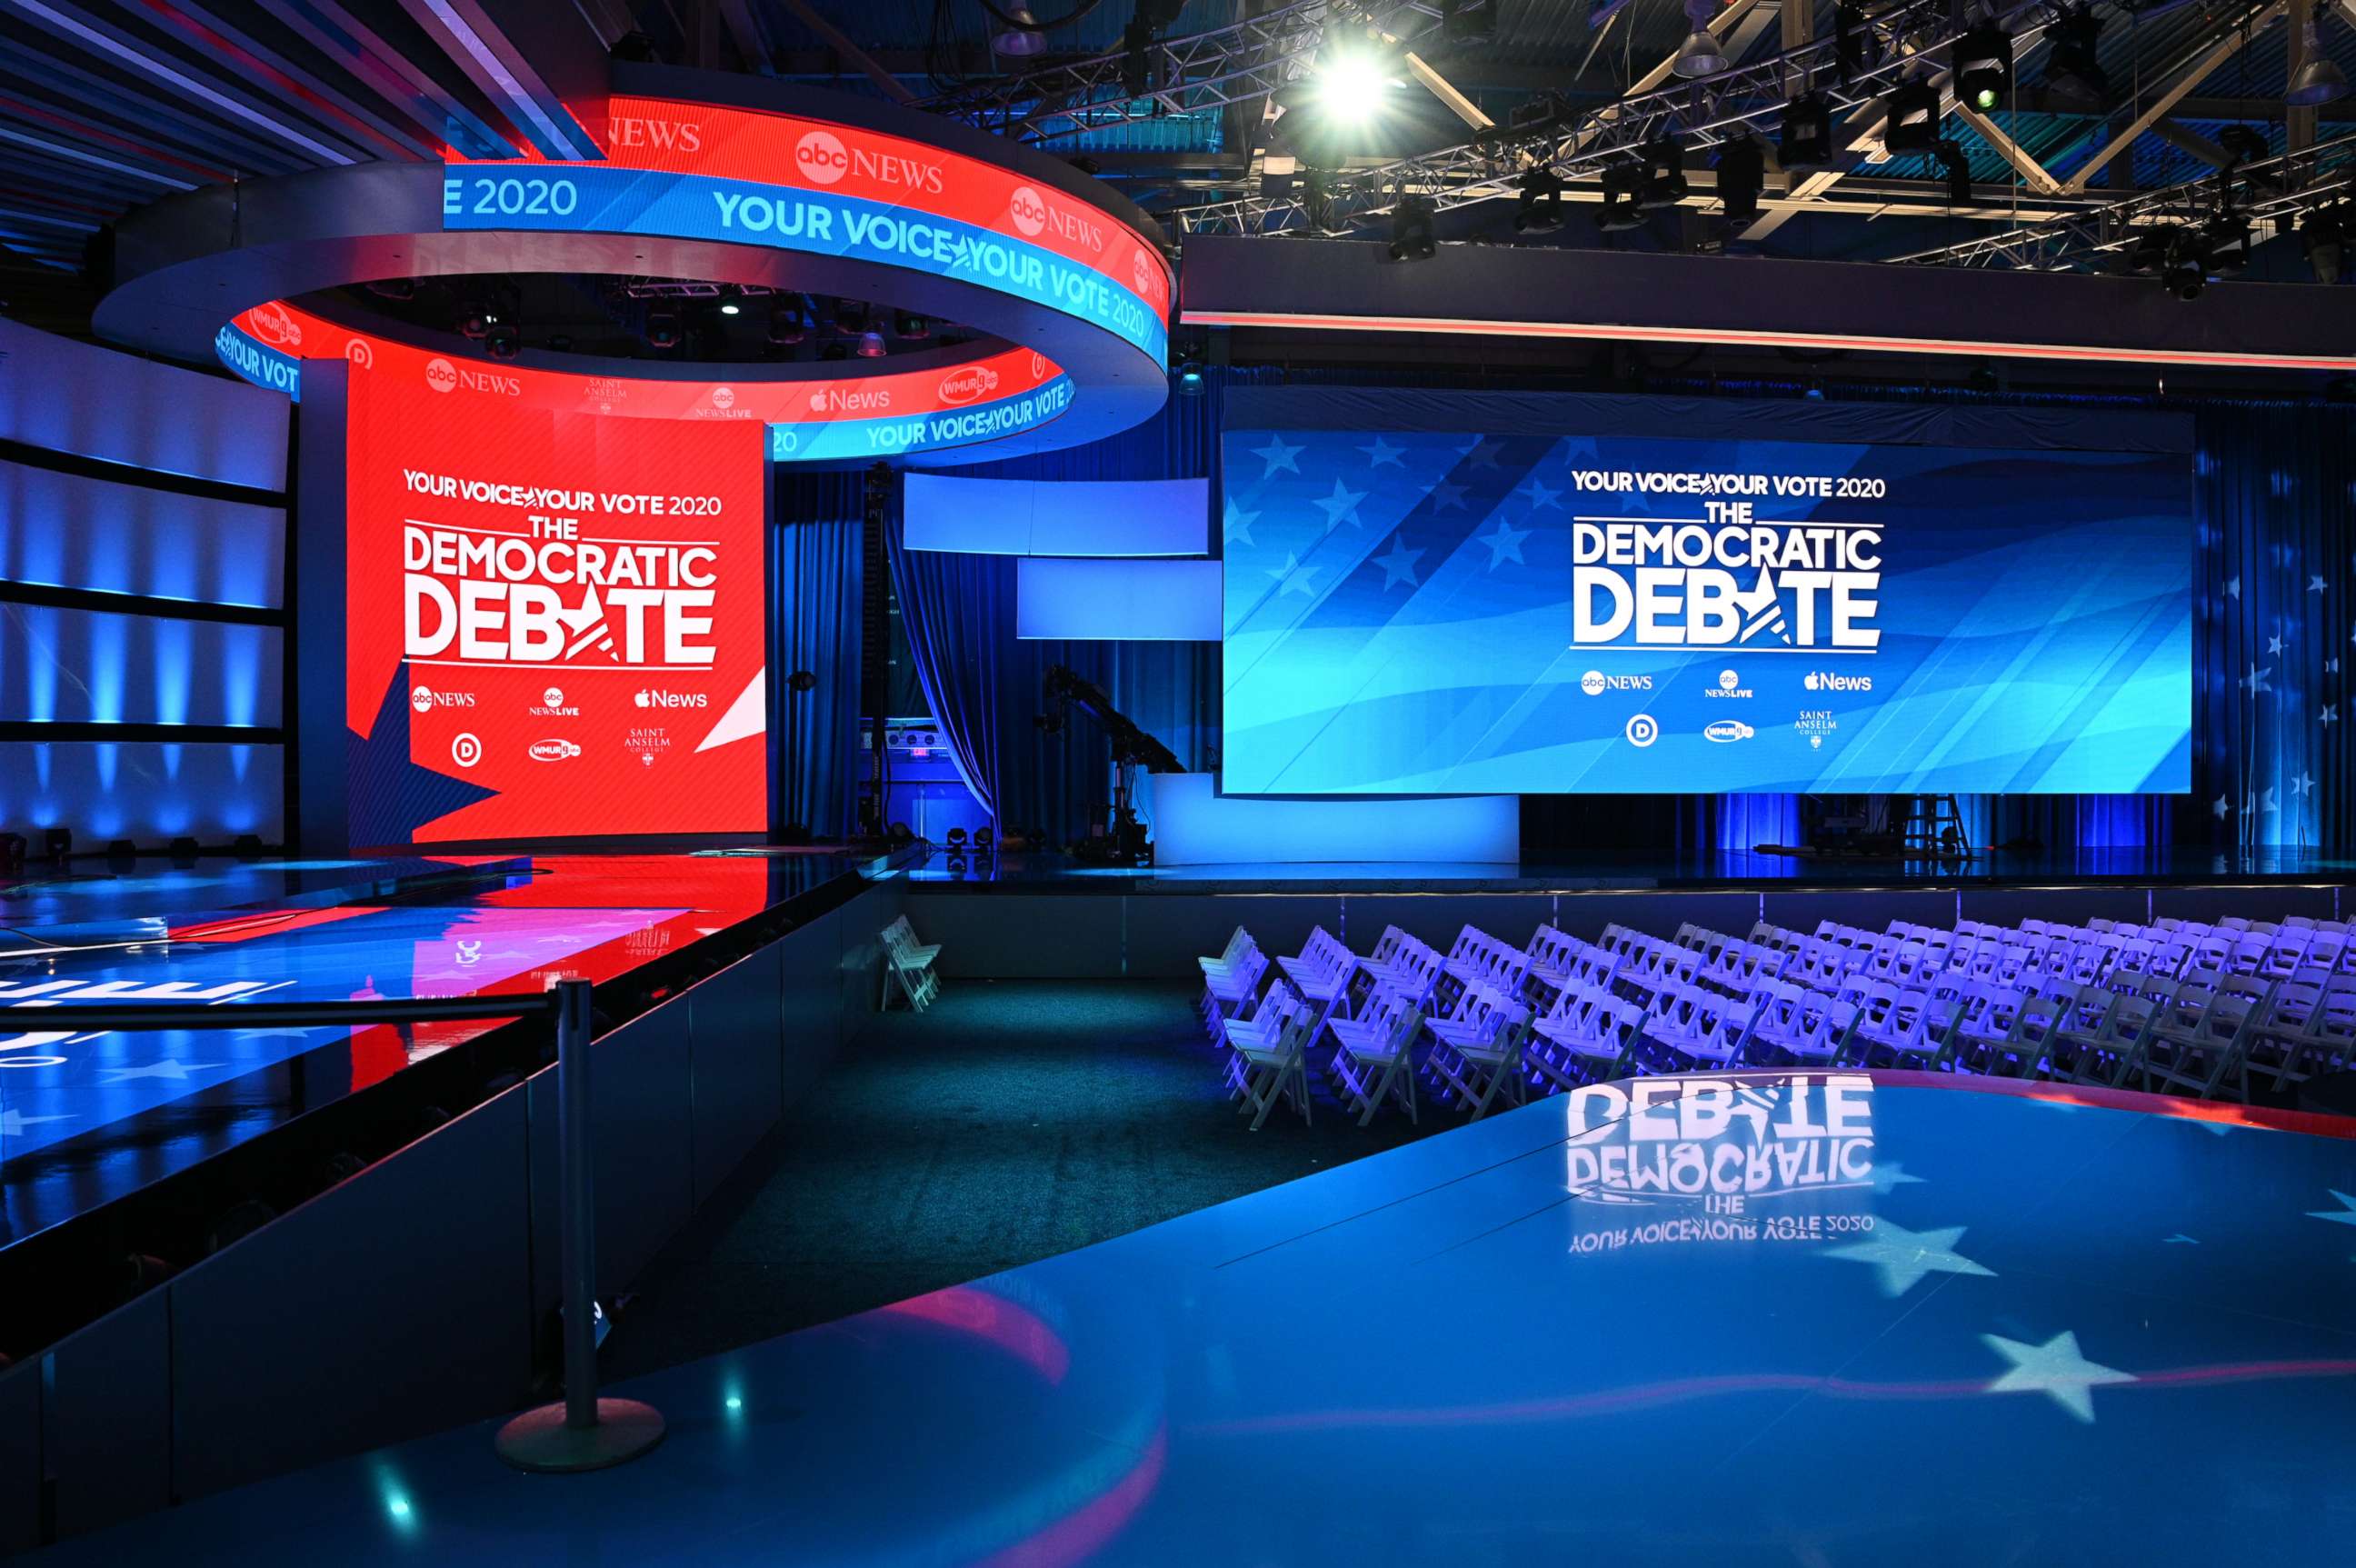 PHOTO: The stage is set for the eighth Democratic primary debate in Manchester, N.H., hosted by ABC News in partnership with WMUR-TV and Apple News.